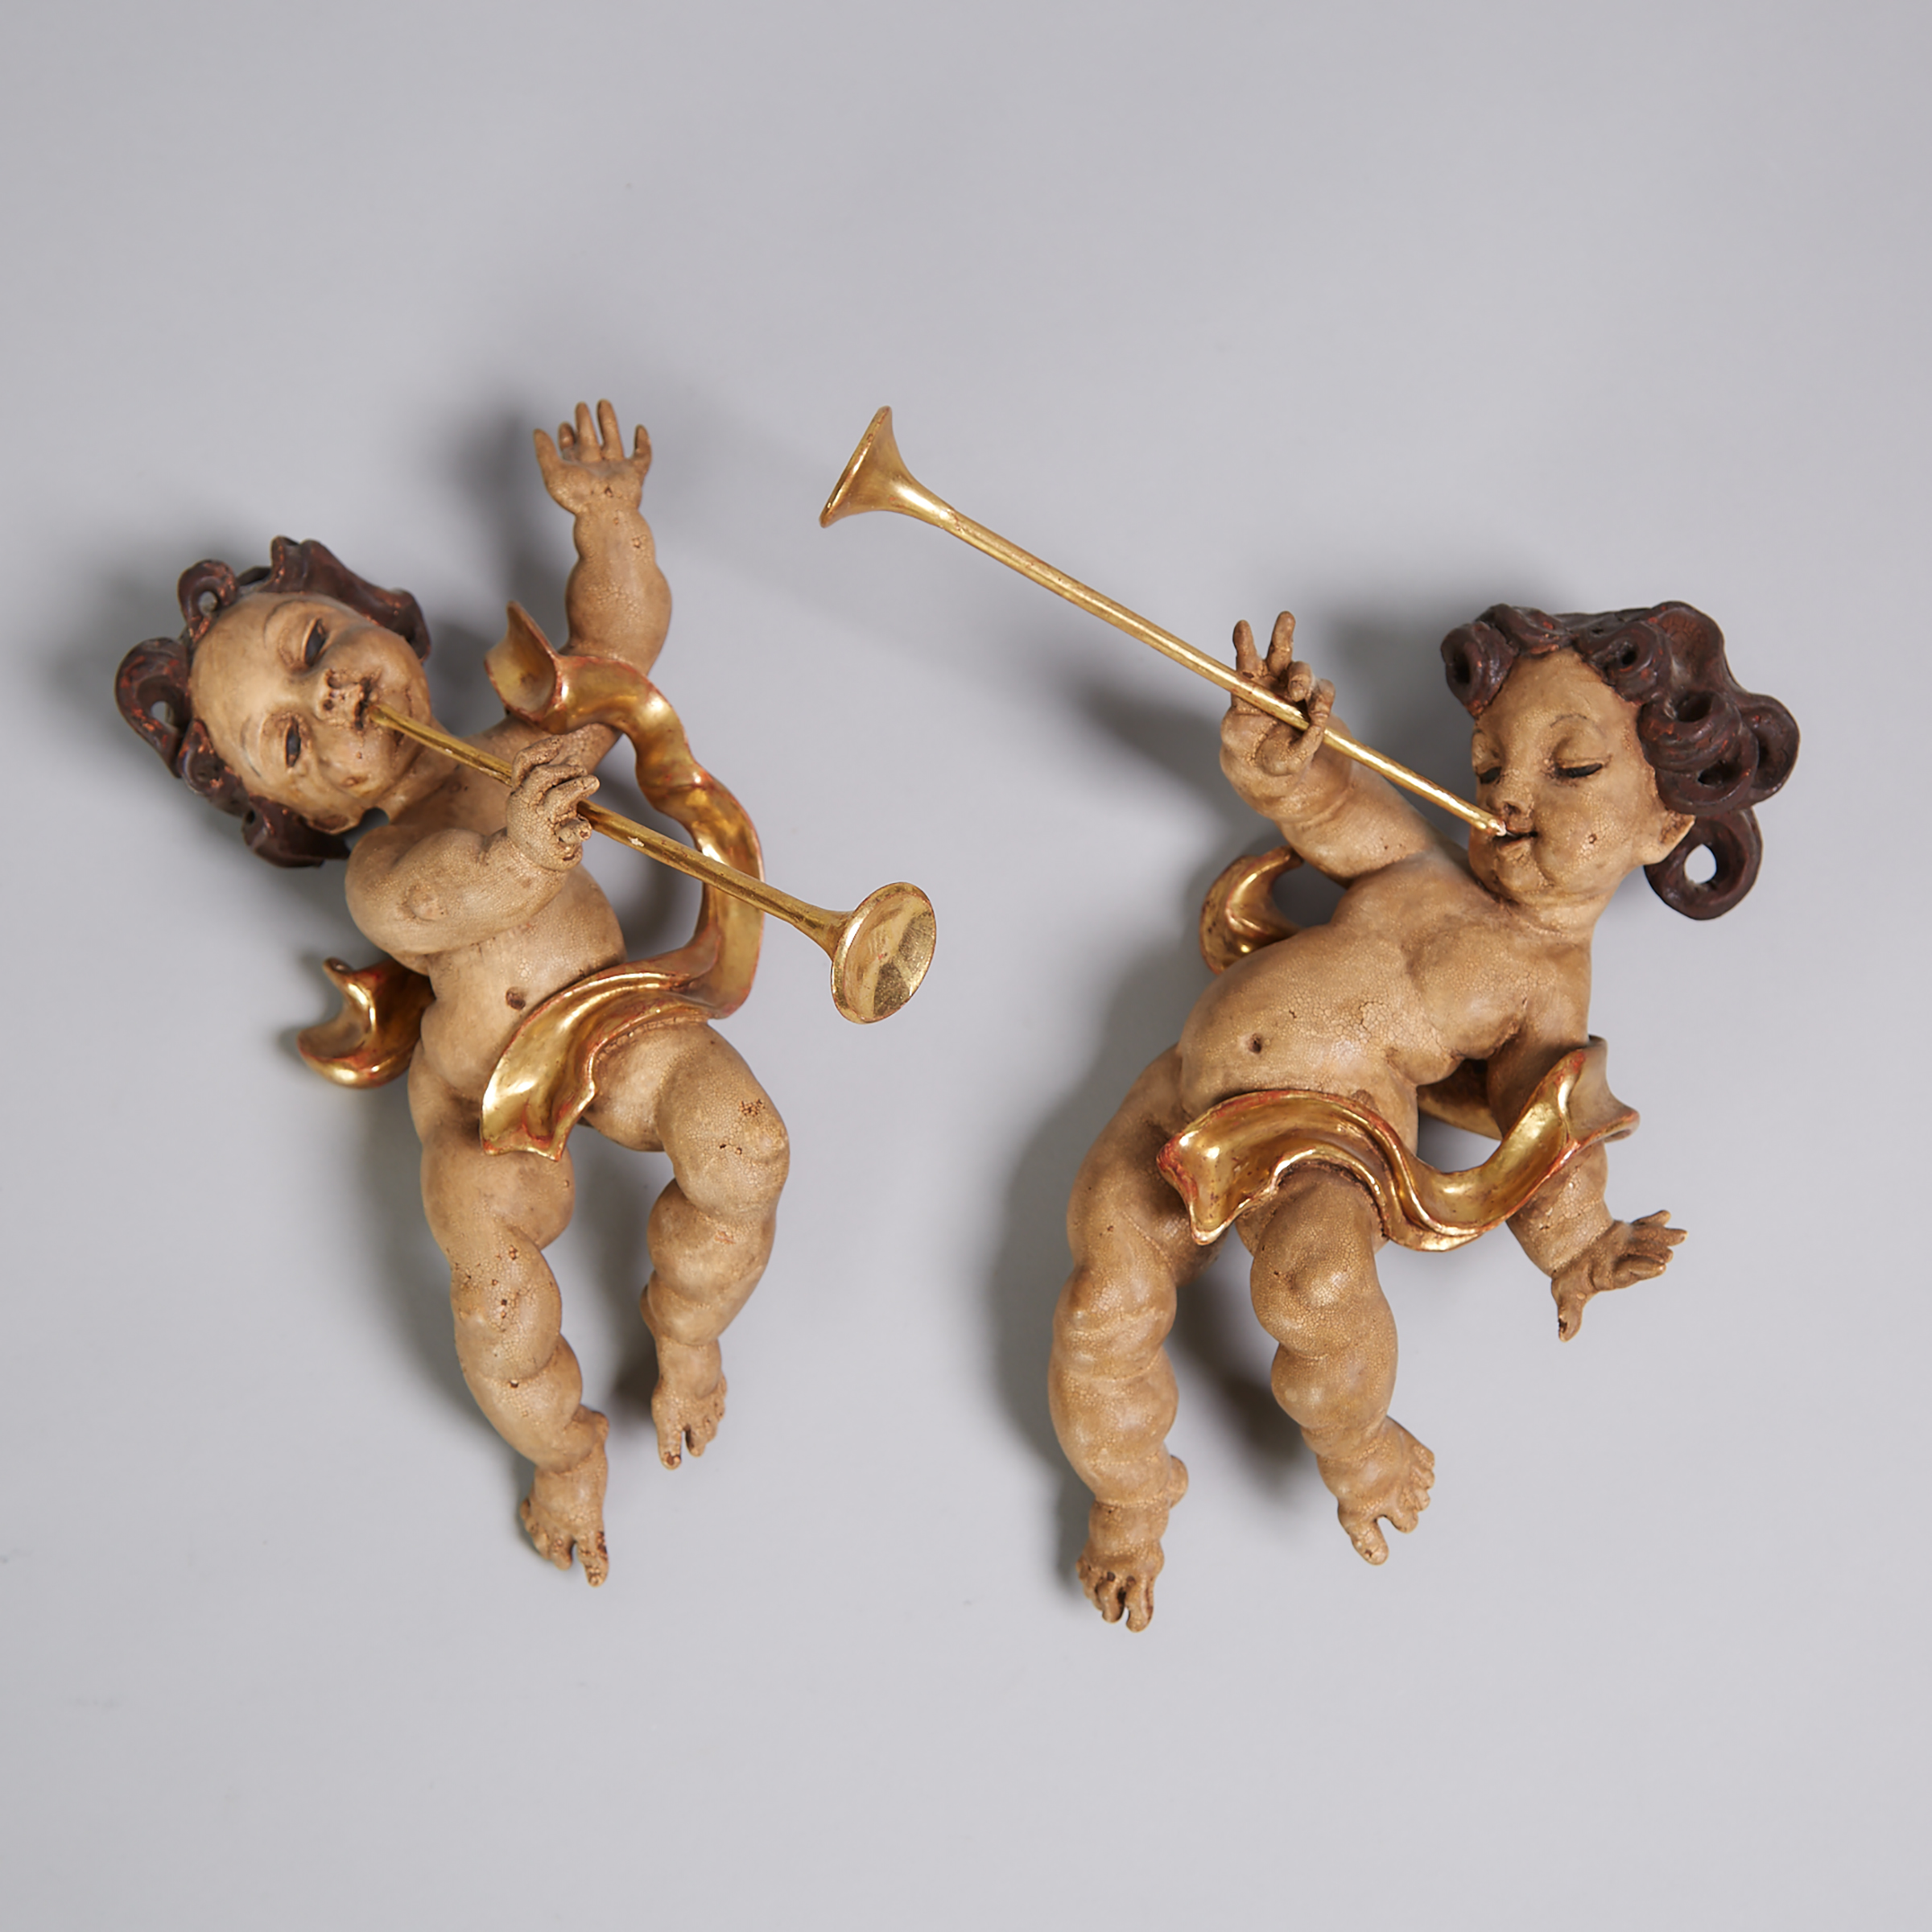 Pair of Italian Carved, Polycromed and Parcel GIlt Cherub Figures, mid 20th century